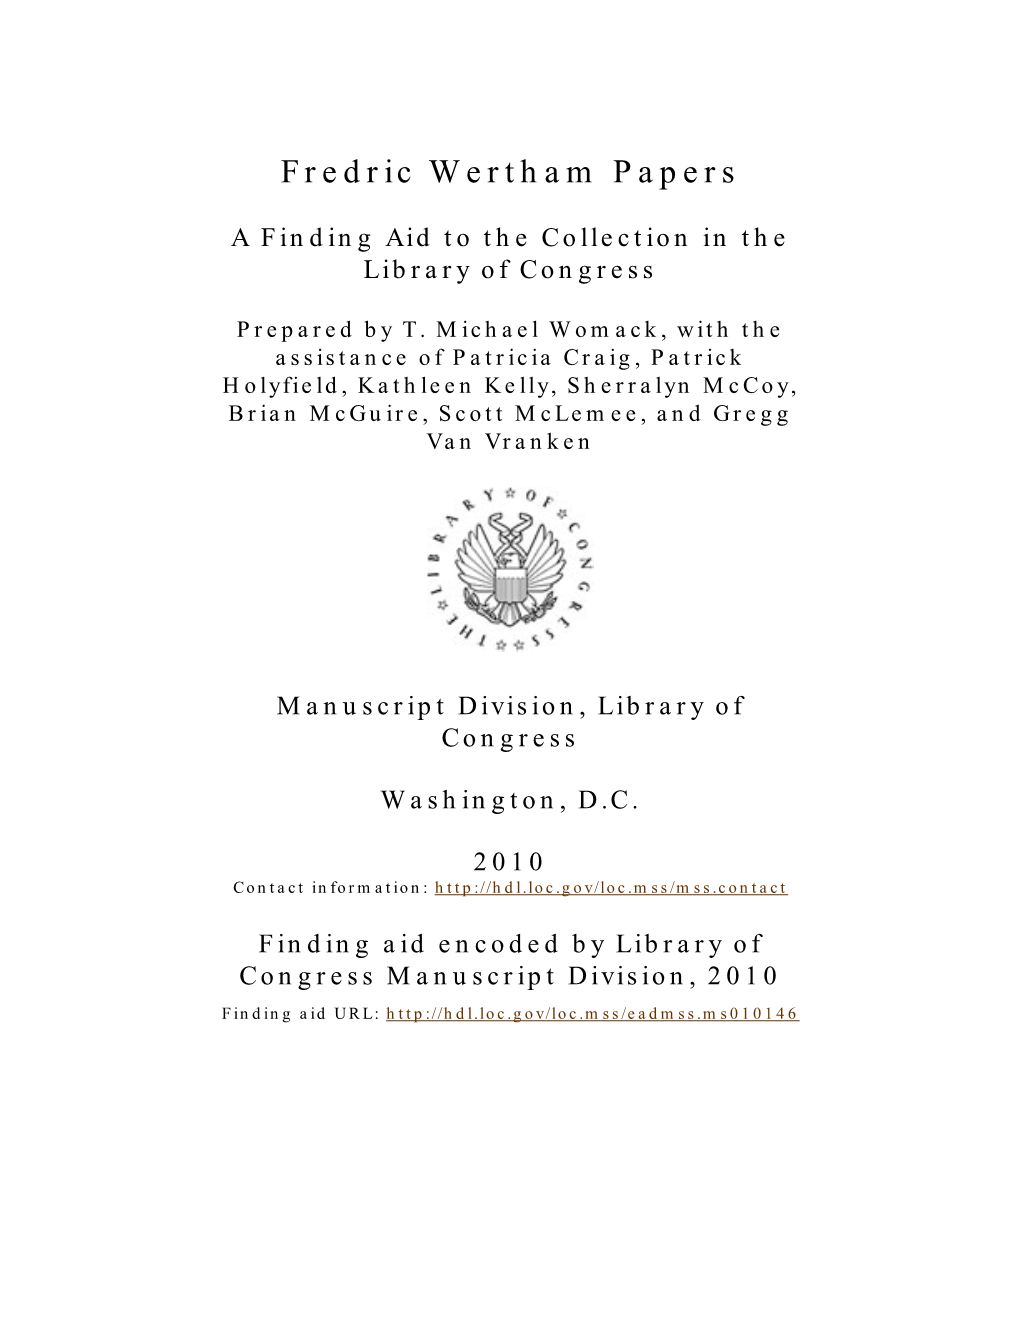 Fredric Wertham Papers [Finding Aid]. Library of Congress